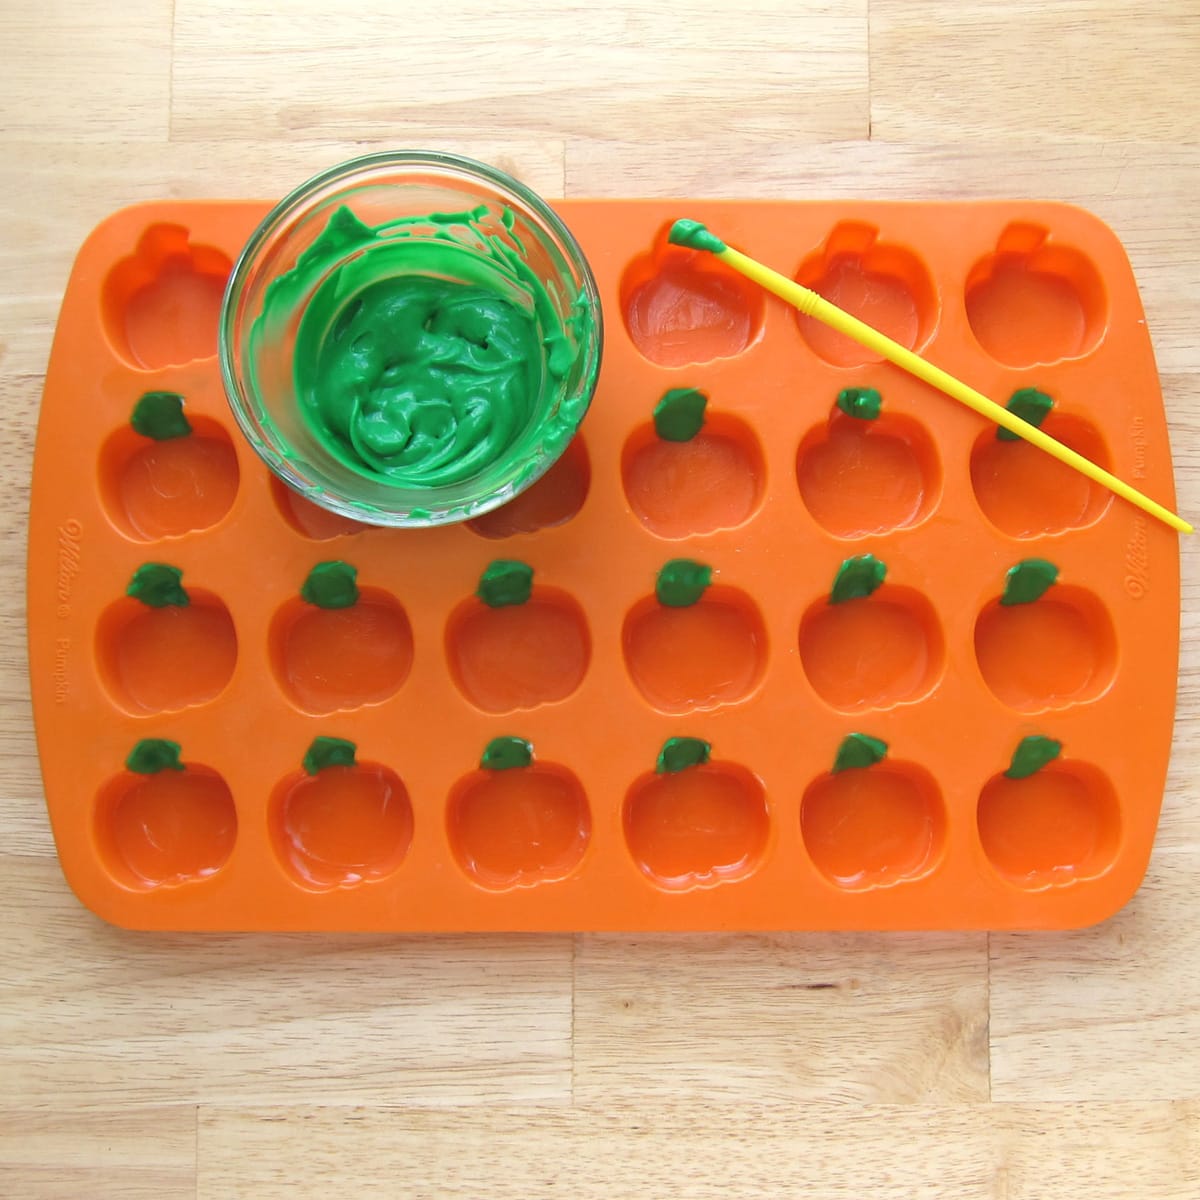 painting green cheesecake filling into the stem of the pumpkins in a silicone mold.